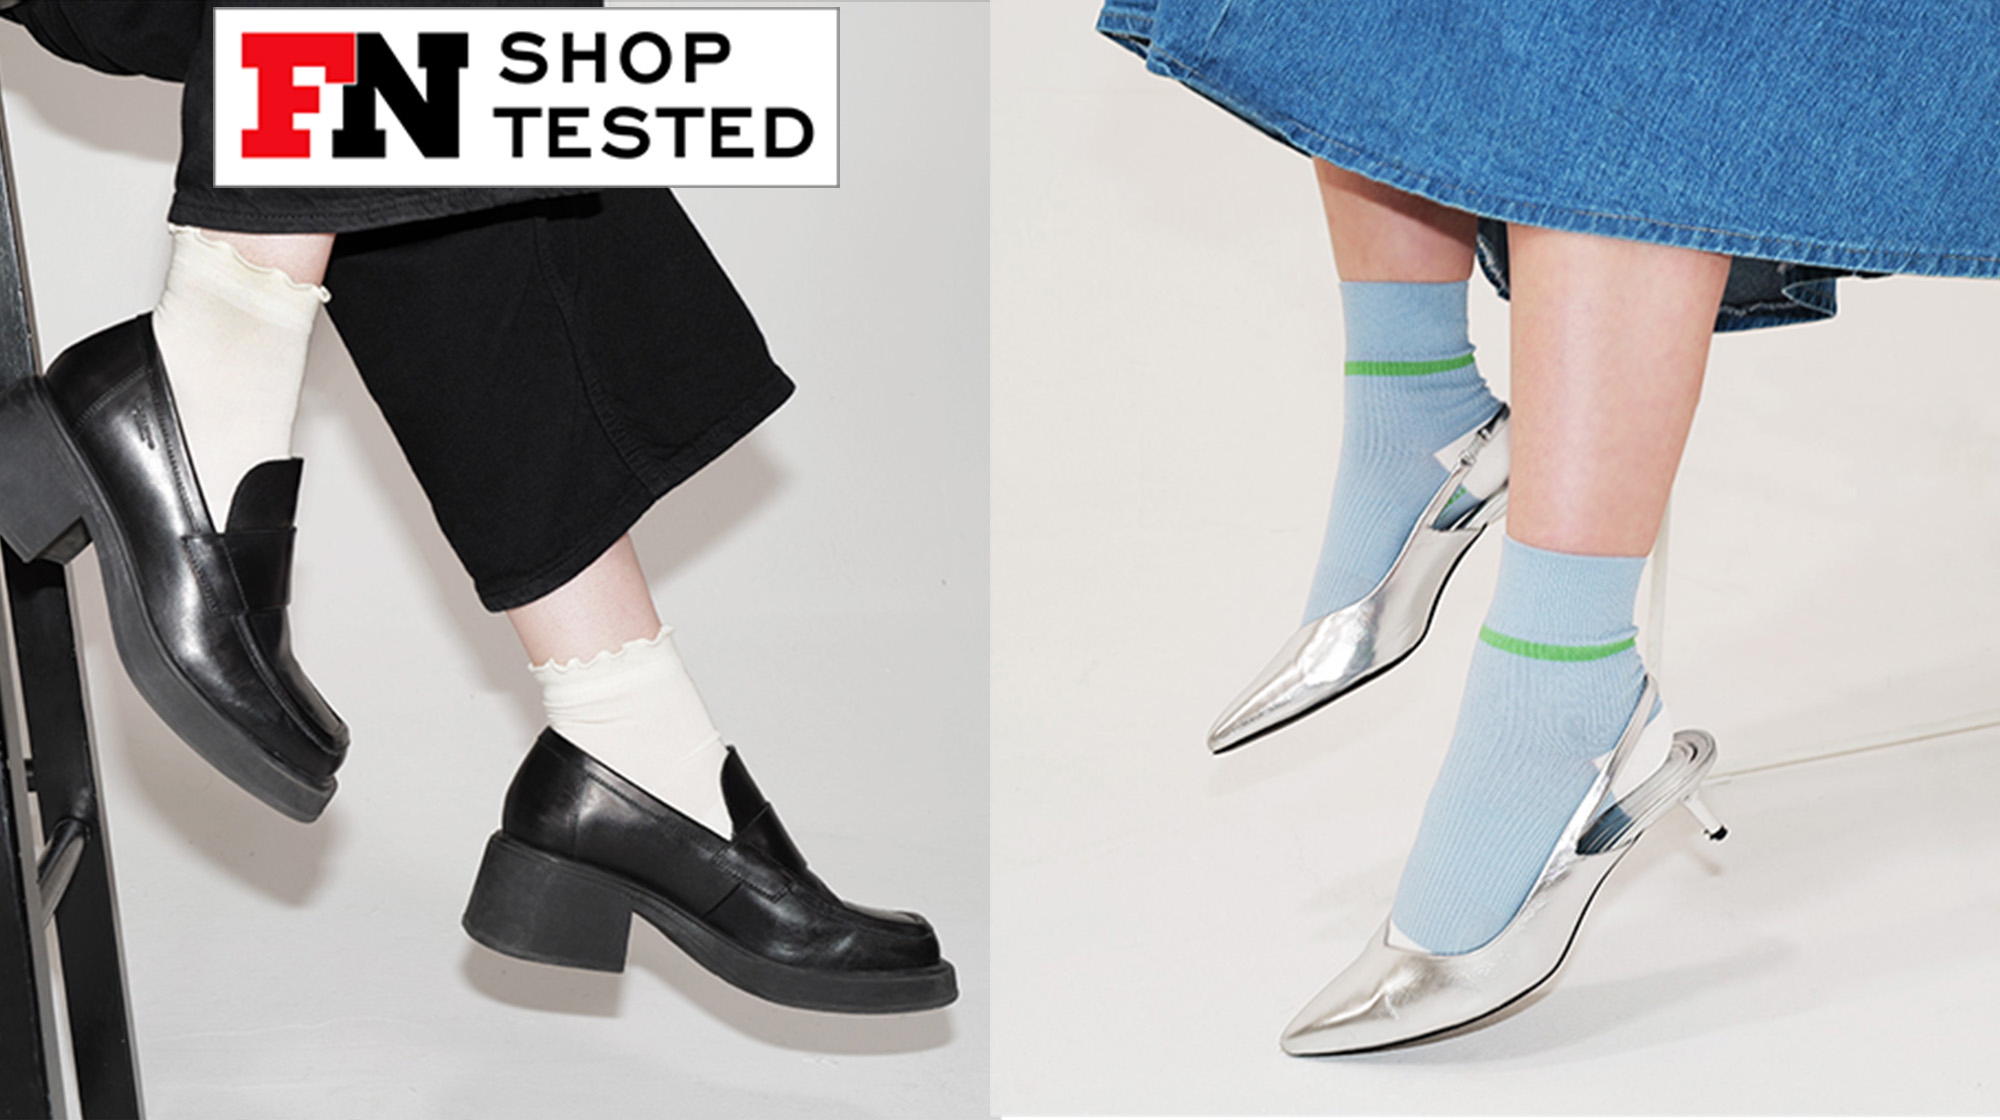 Two Footwear News editors test Bombas socks that they style with black loafers and silver kitten heels